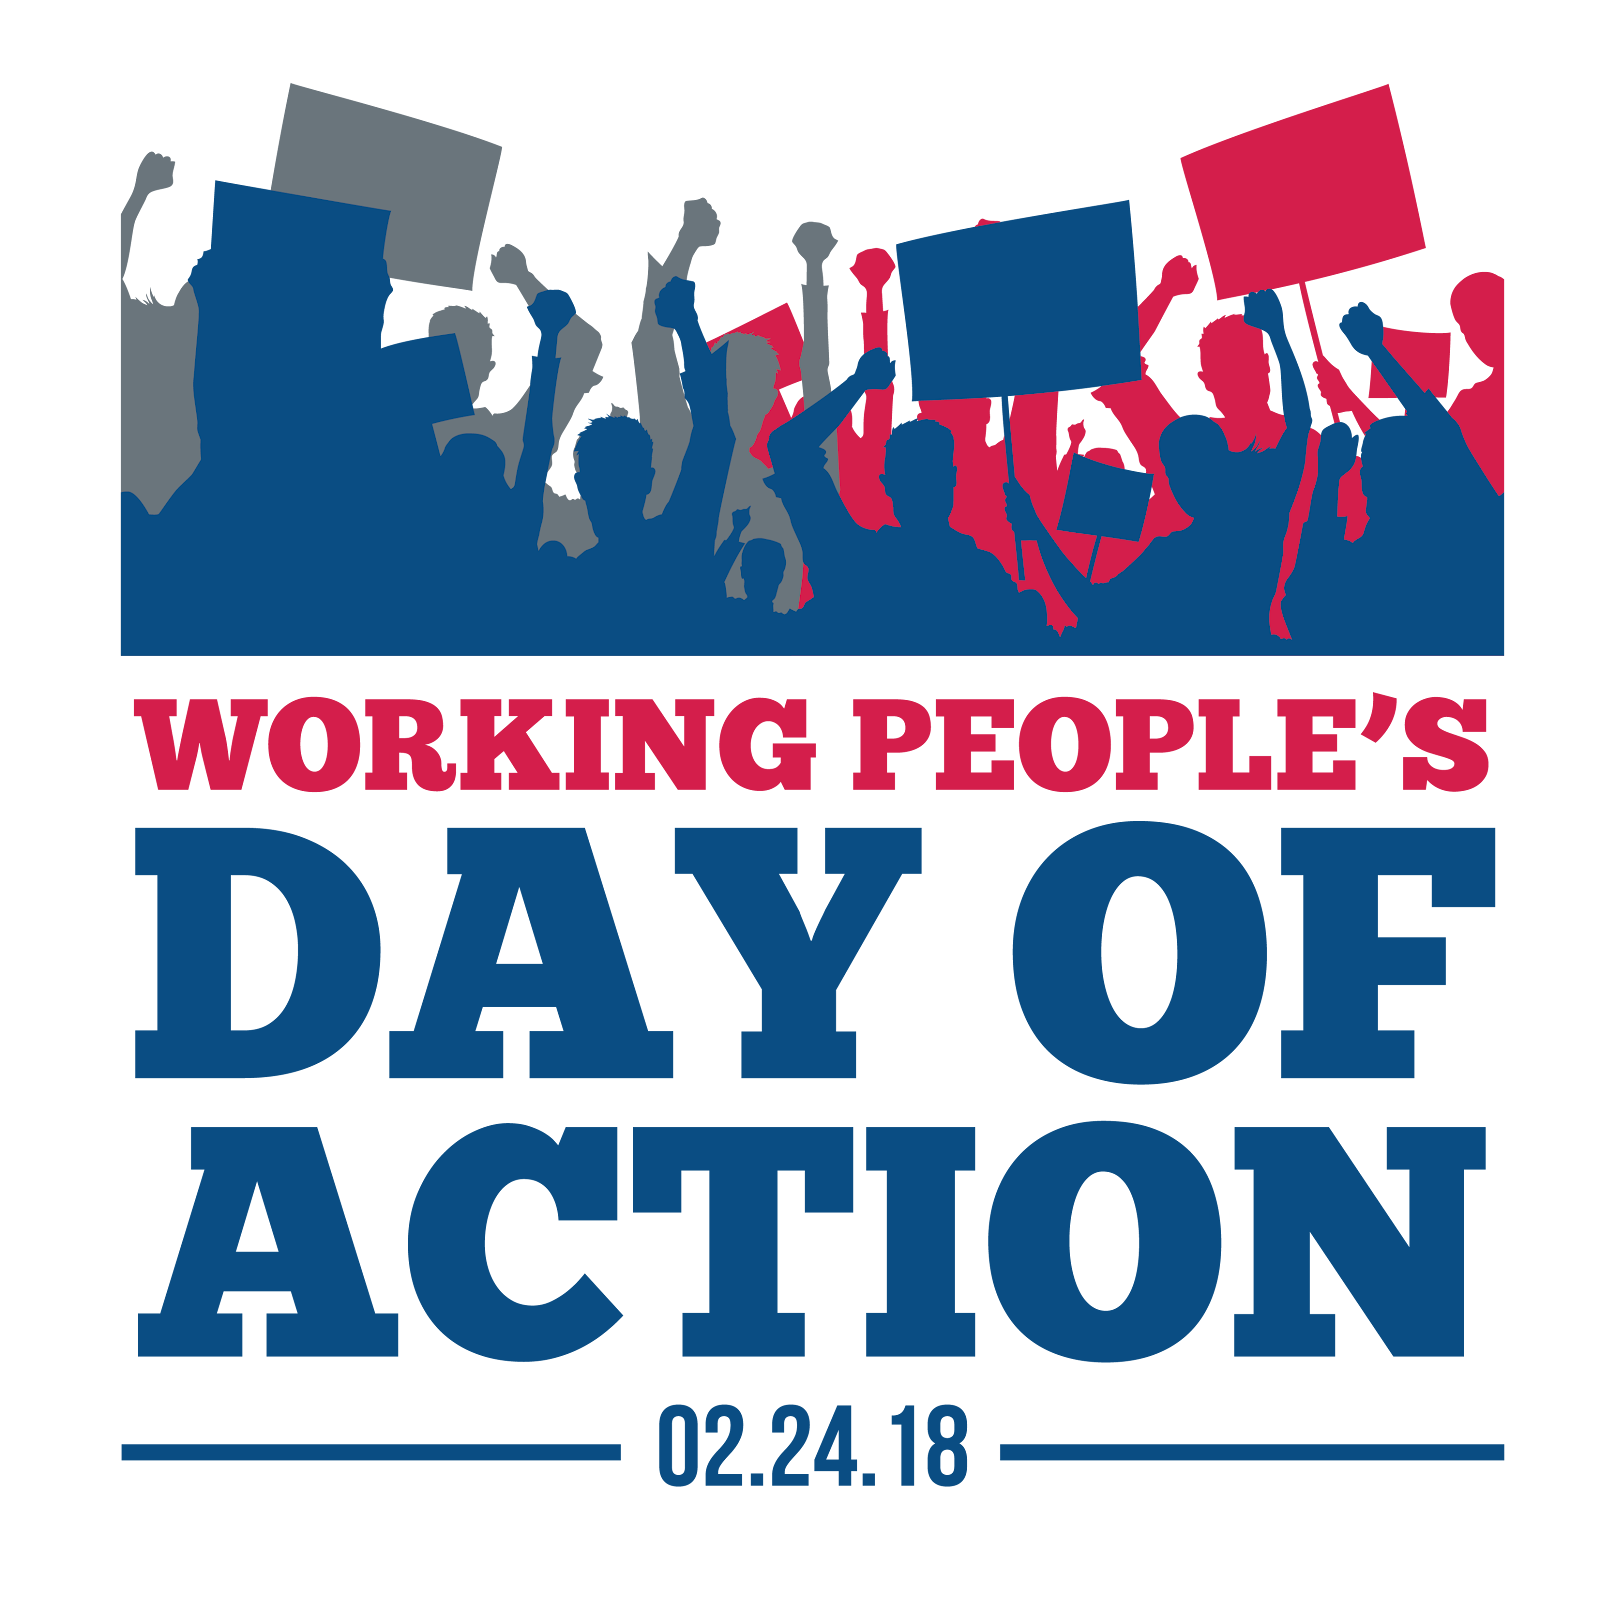 Working People's Day of Action